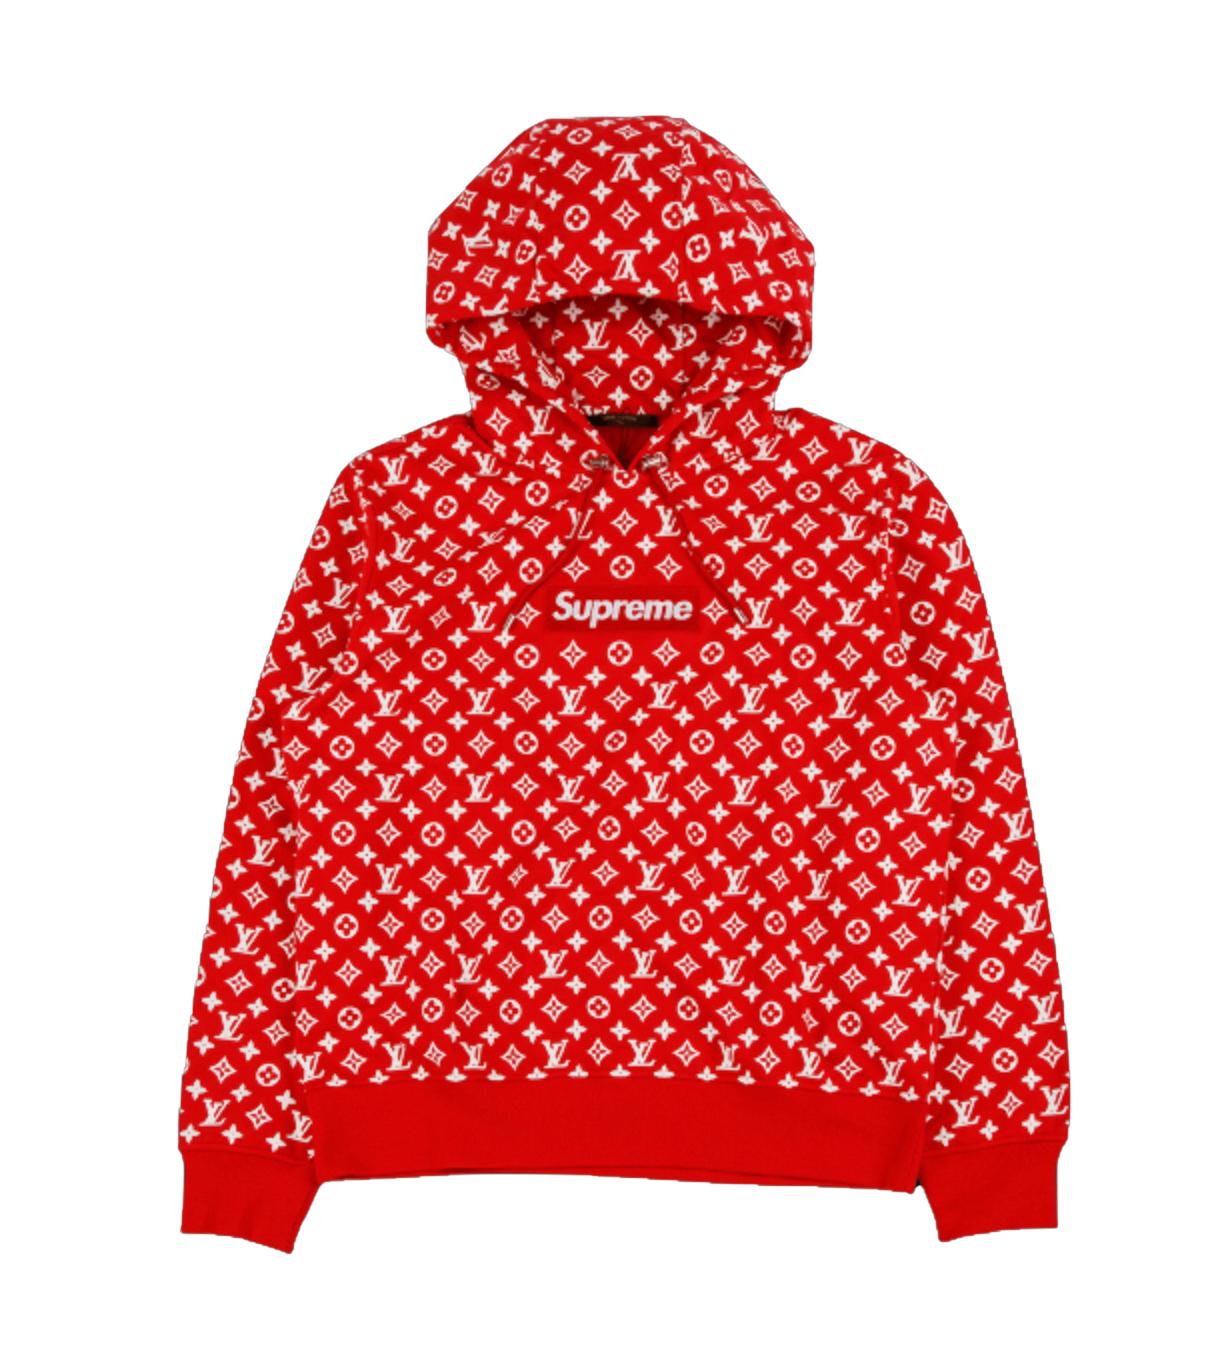 Lyst - Supreme X Louis Vuitton Box Logo Hooded Sweatshirt Red in Red for Men